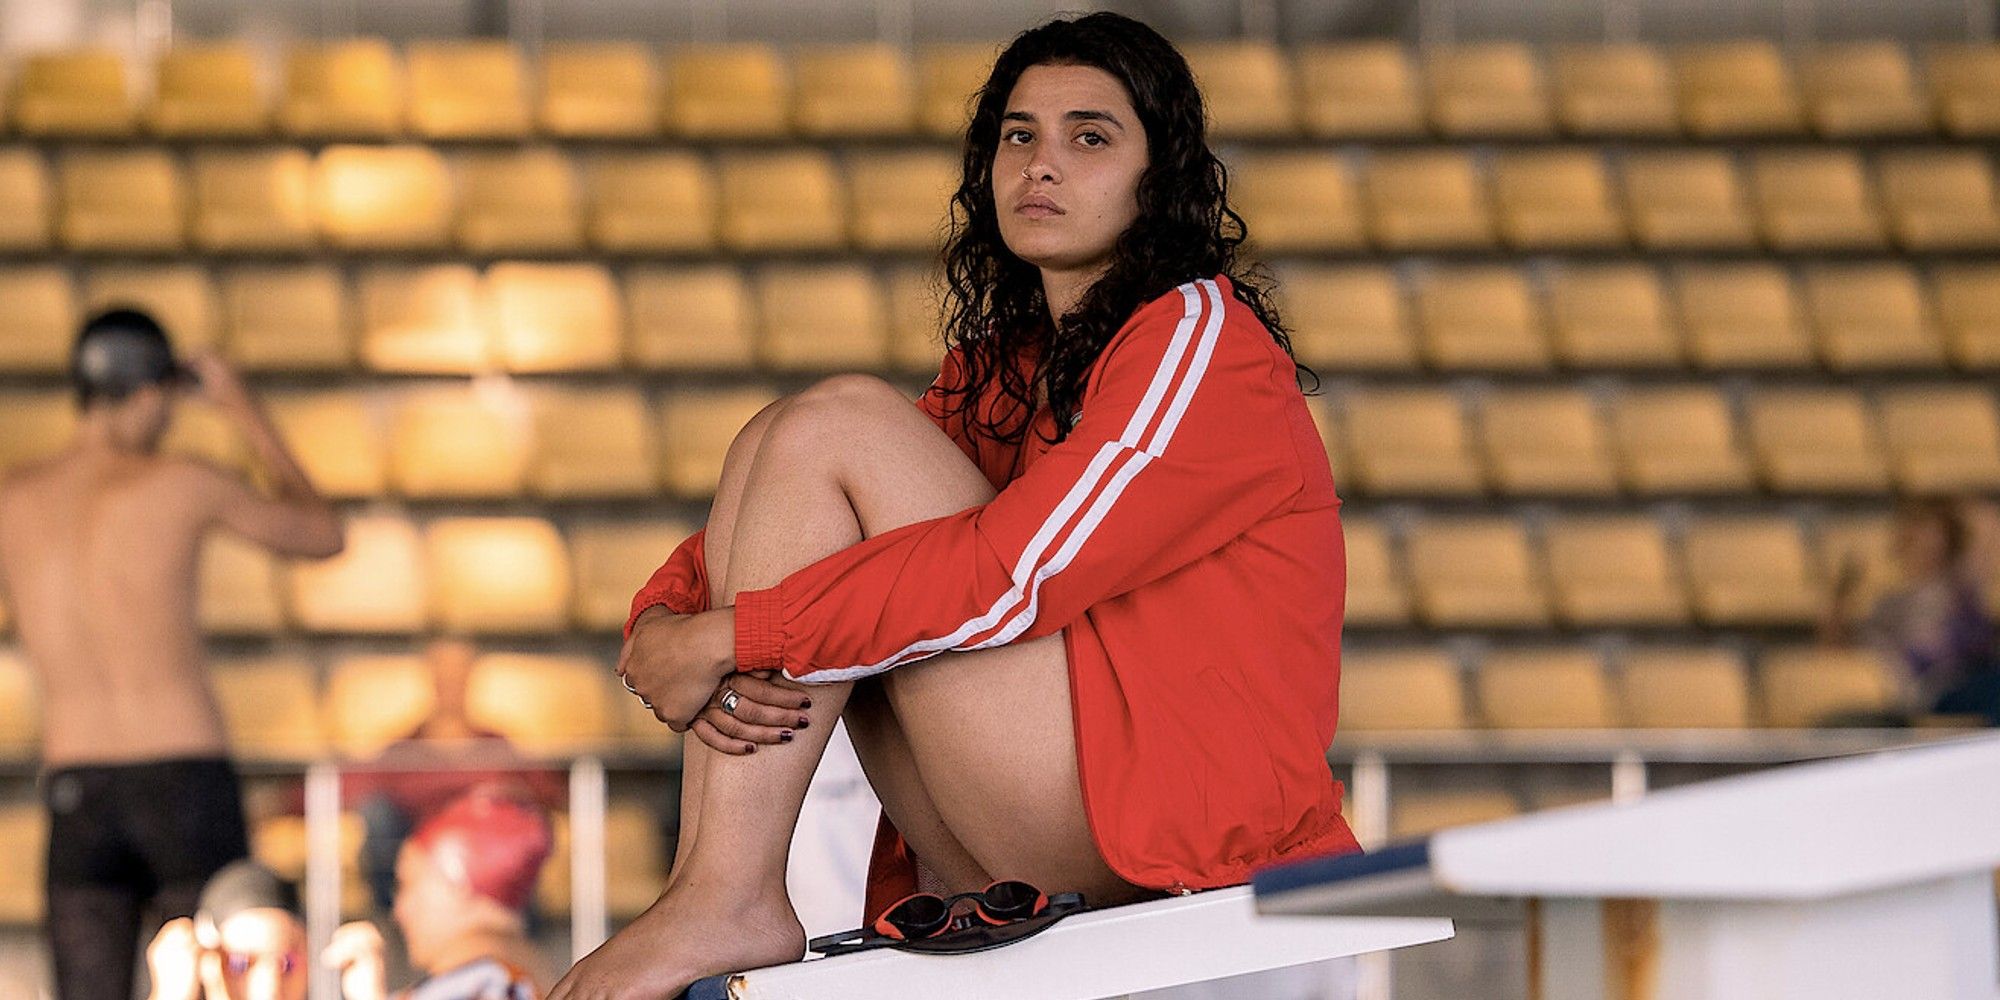 Manal Issa in Netflix's 'The Swimmers'